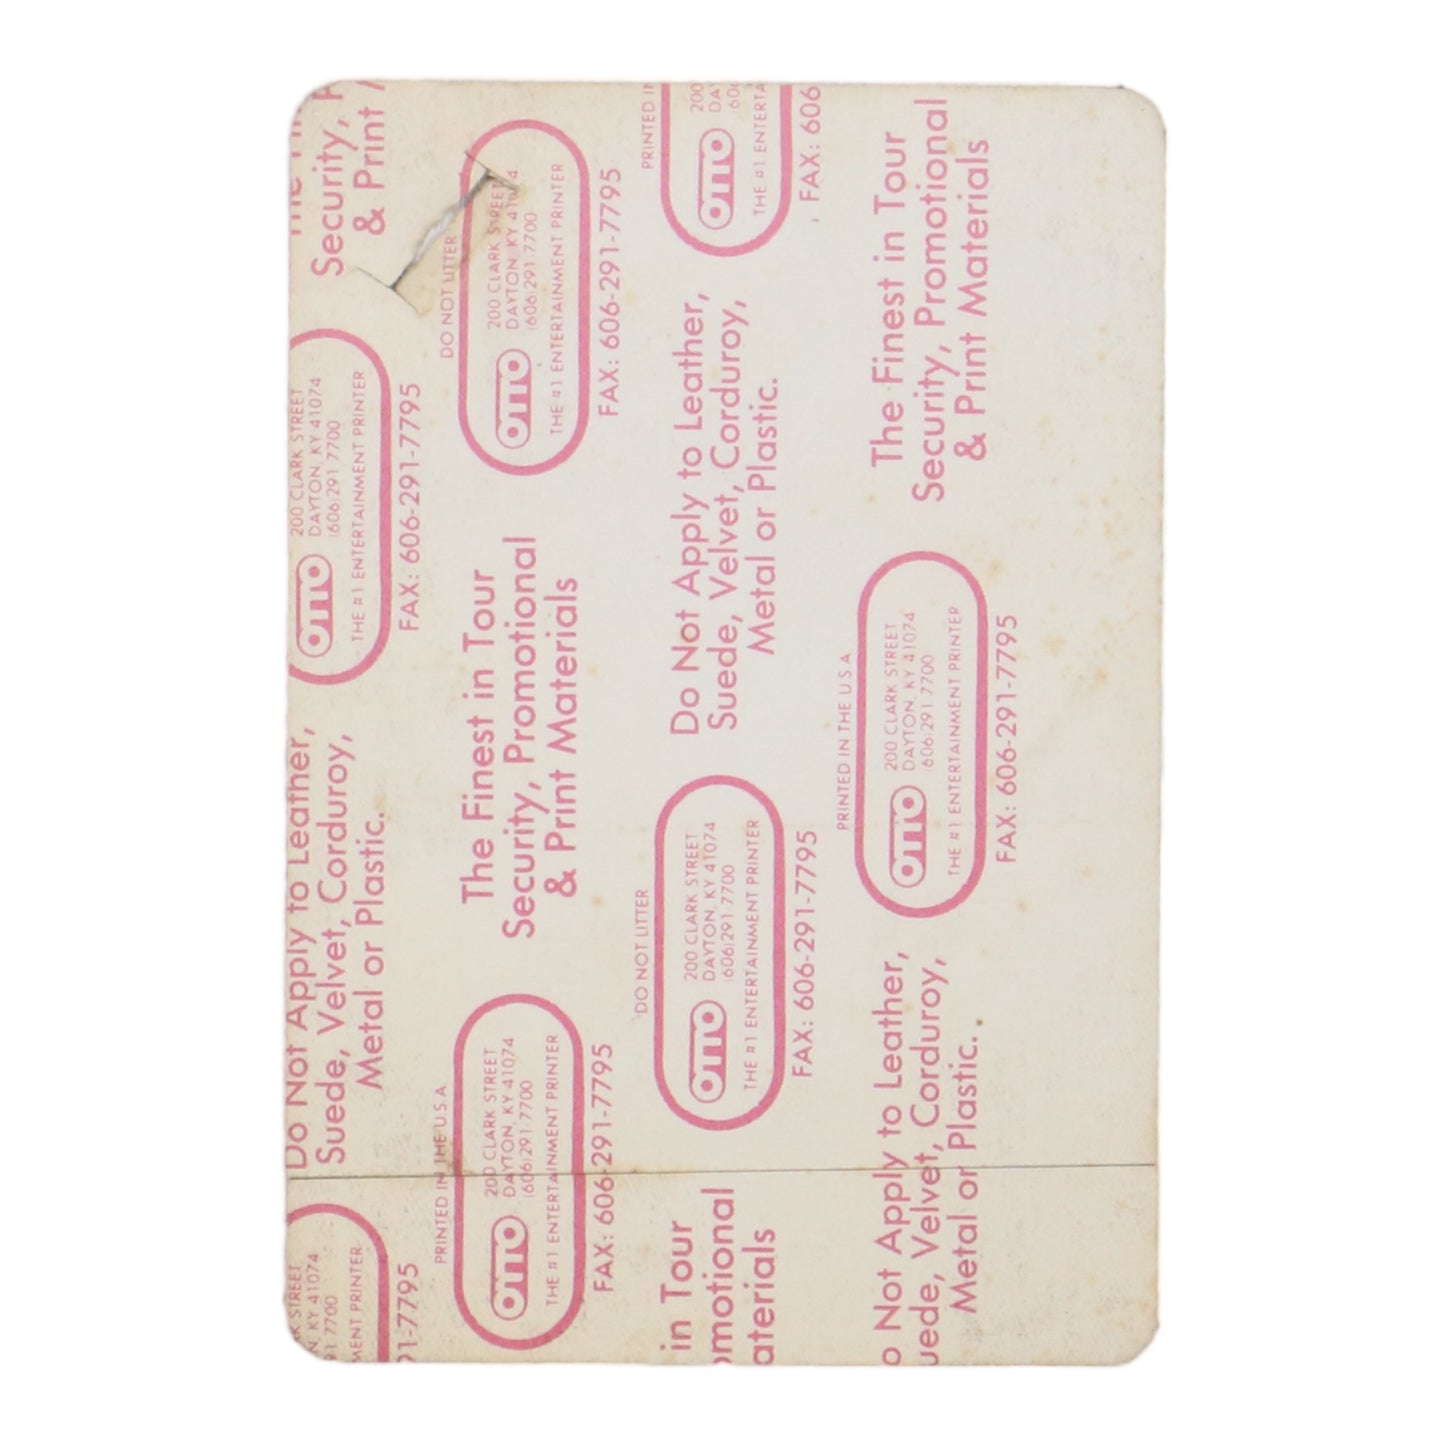 1987 Dolly Parton Backstage Pass